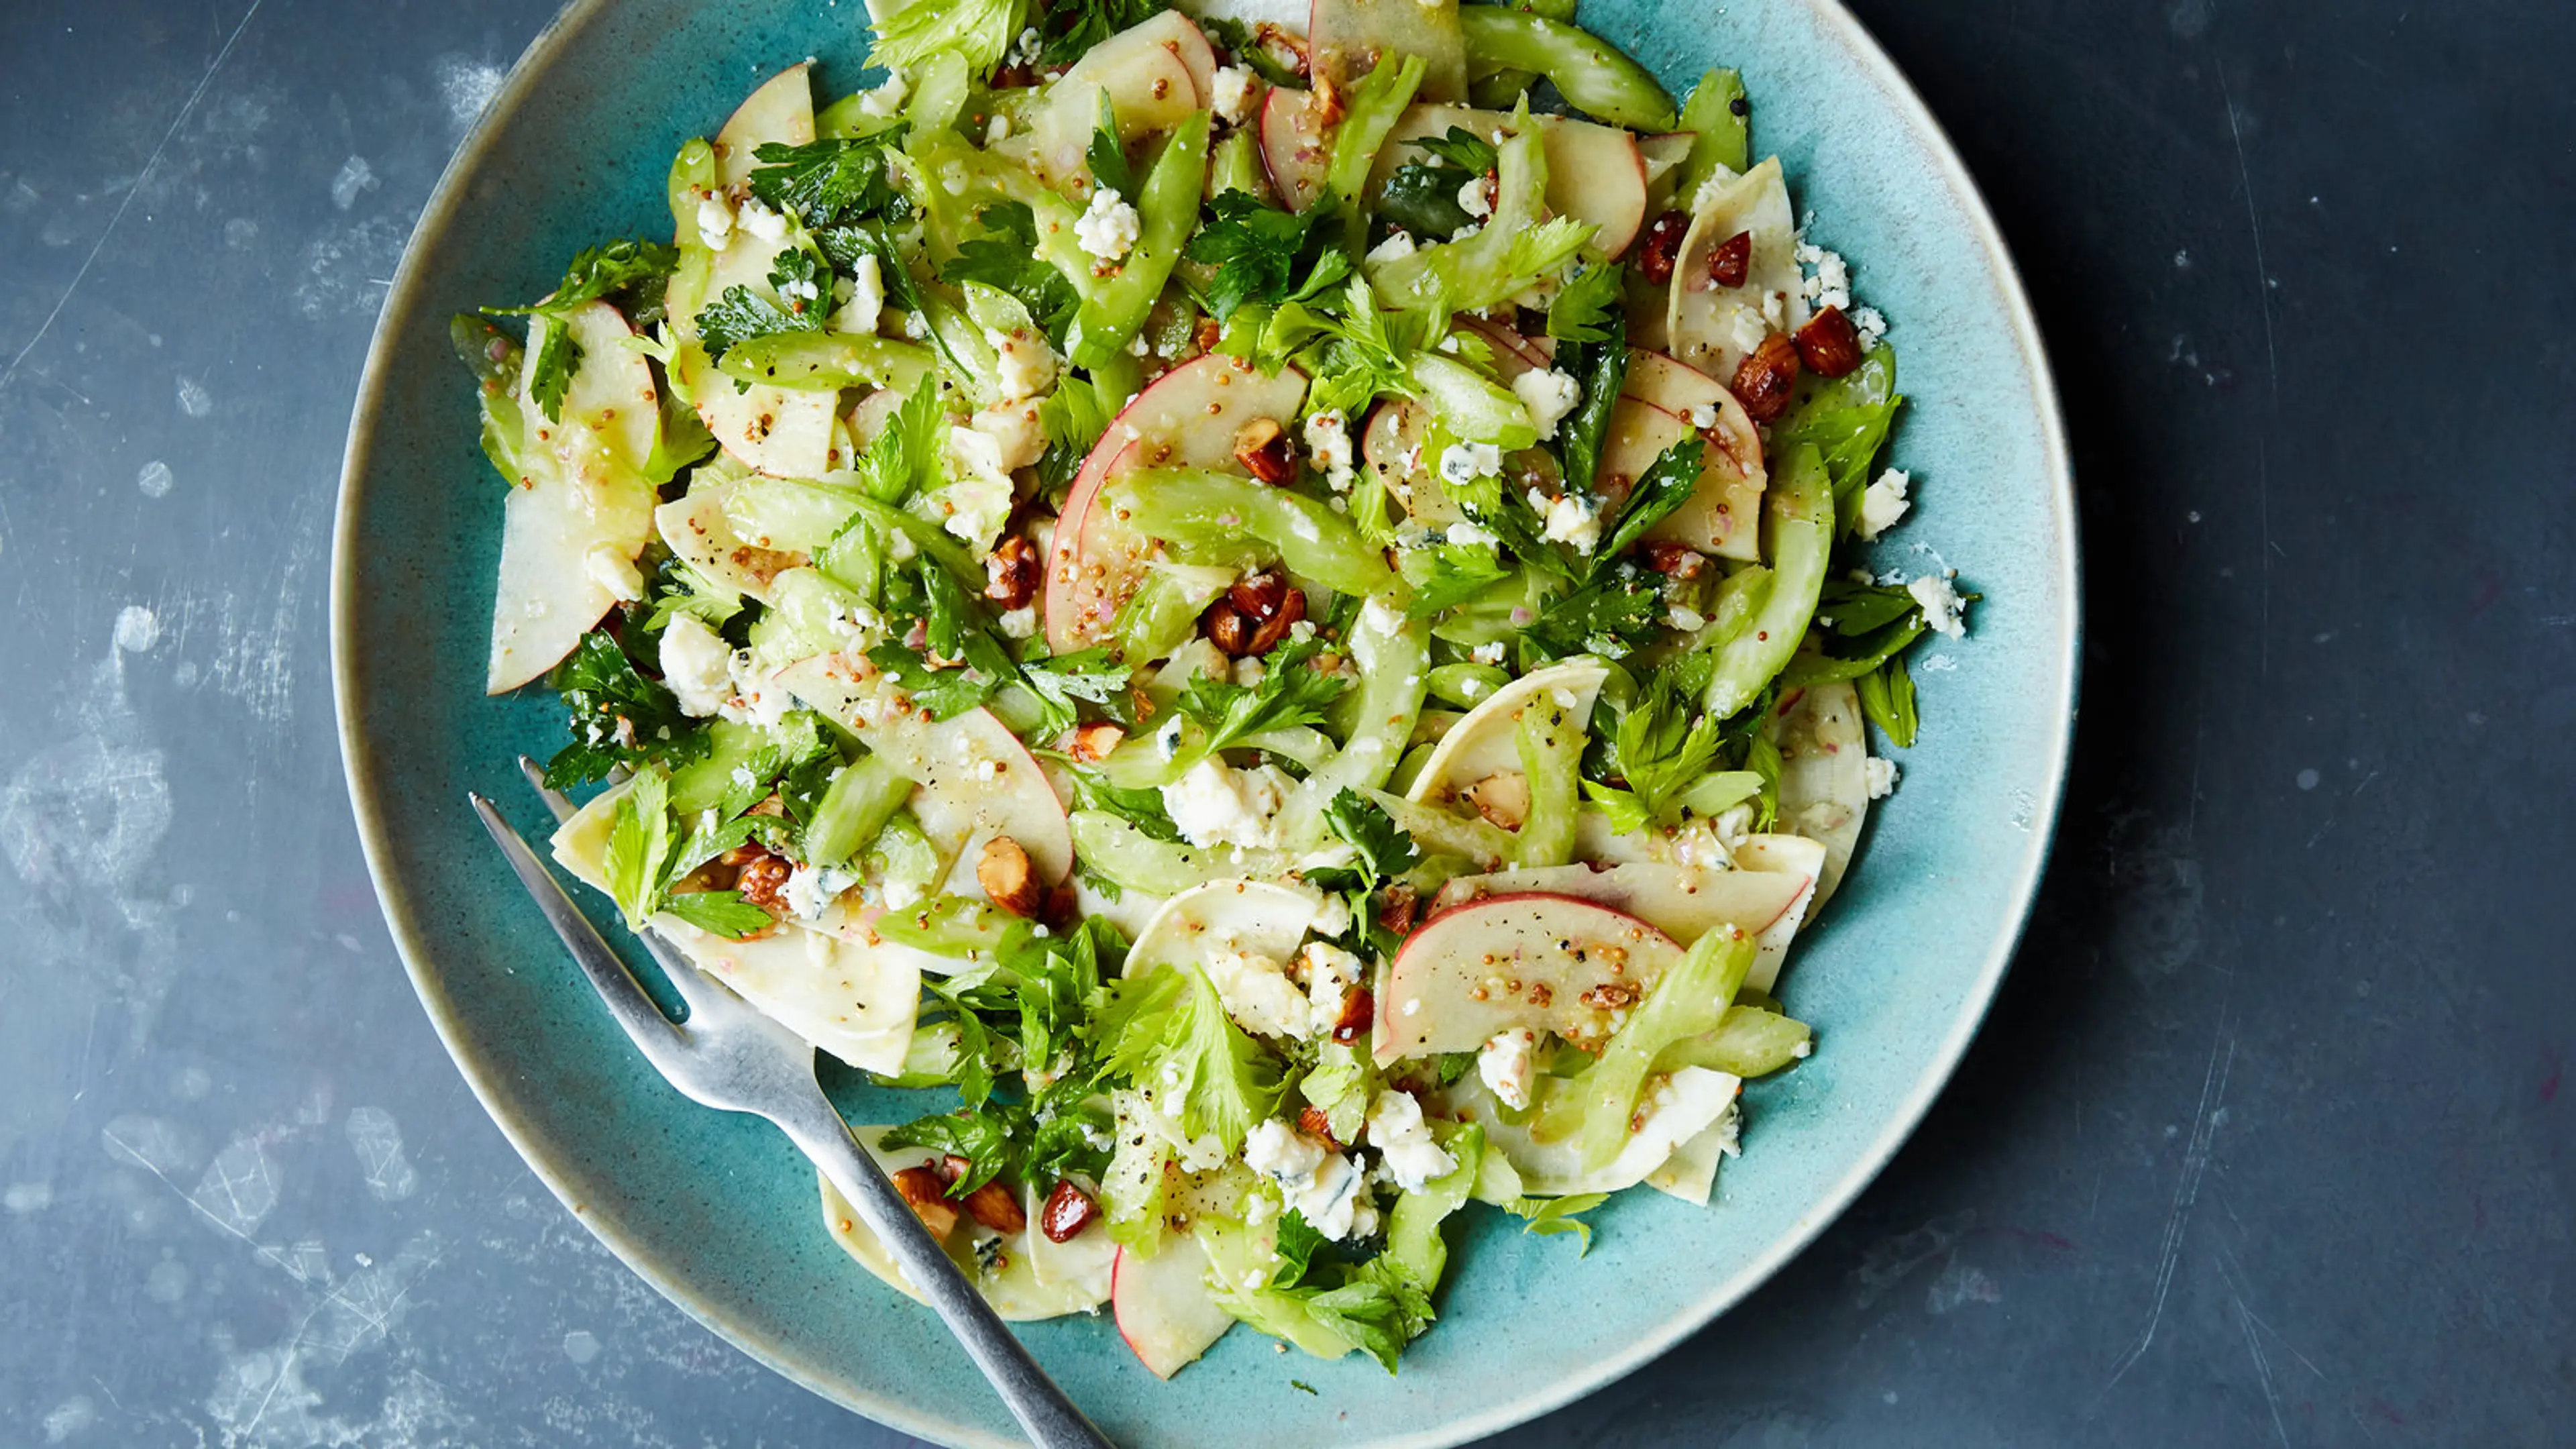 Celery Salad With Apples and Blue Cheese